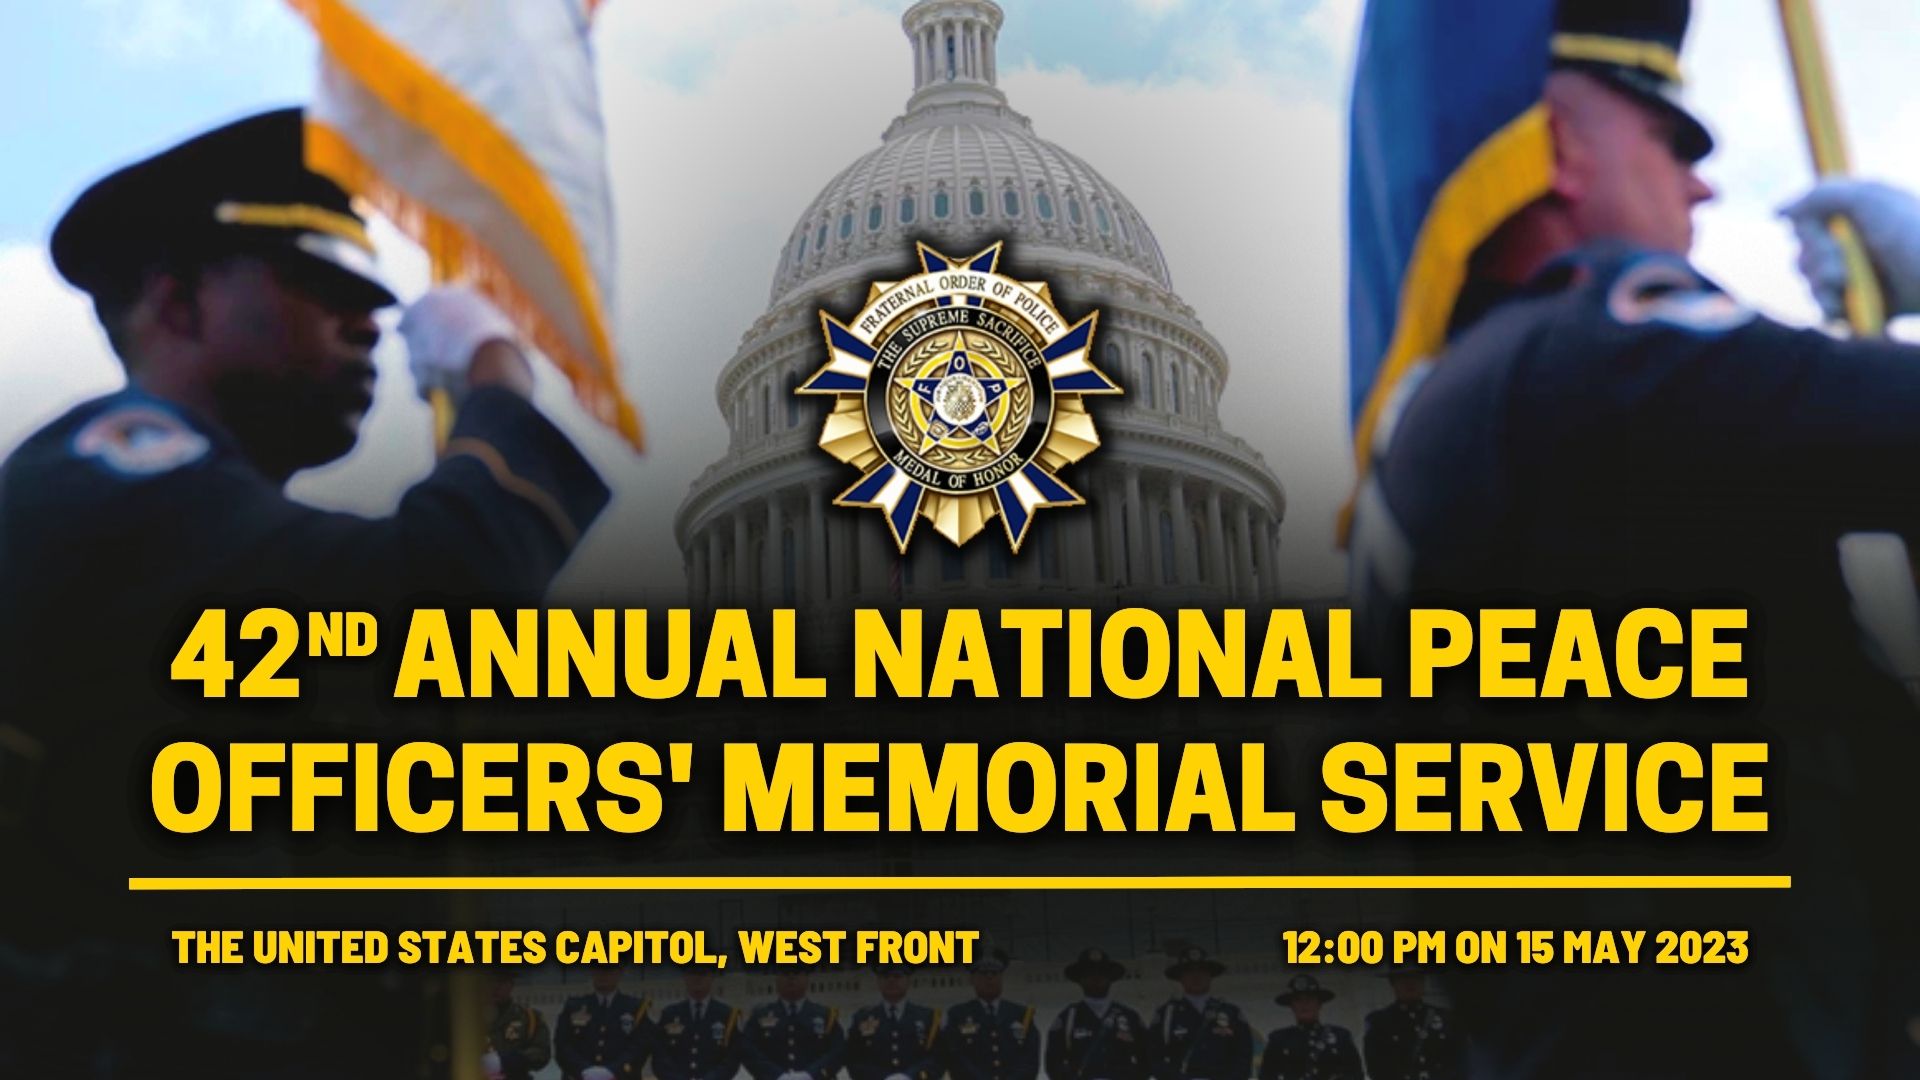 National Peace Officers' Memorial Service Fraternal Order of Police